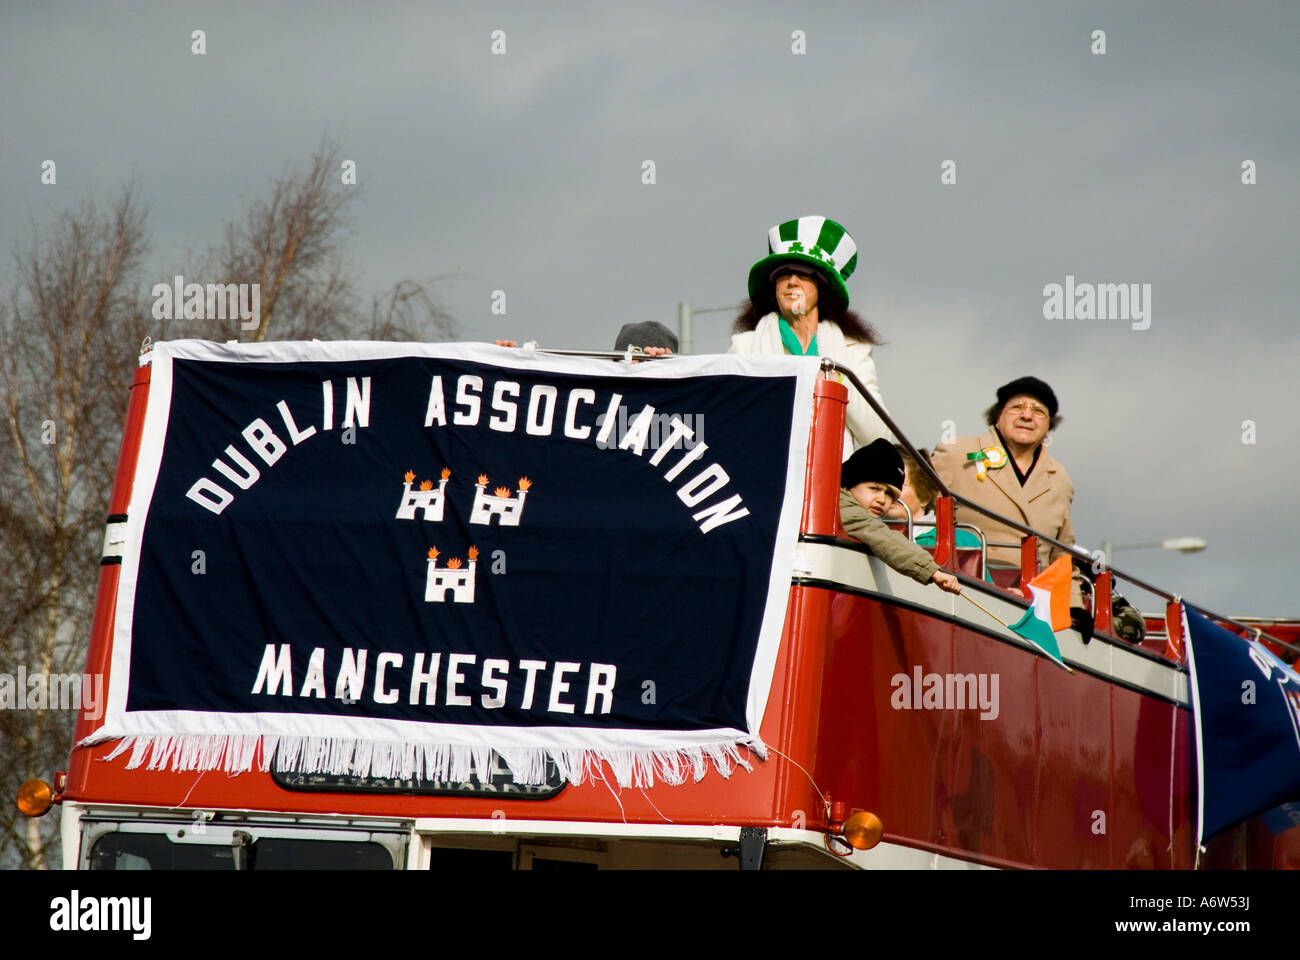 Bus with Dublin Association sign on St.Patrick day Parade Manchester UK Stock Photo